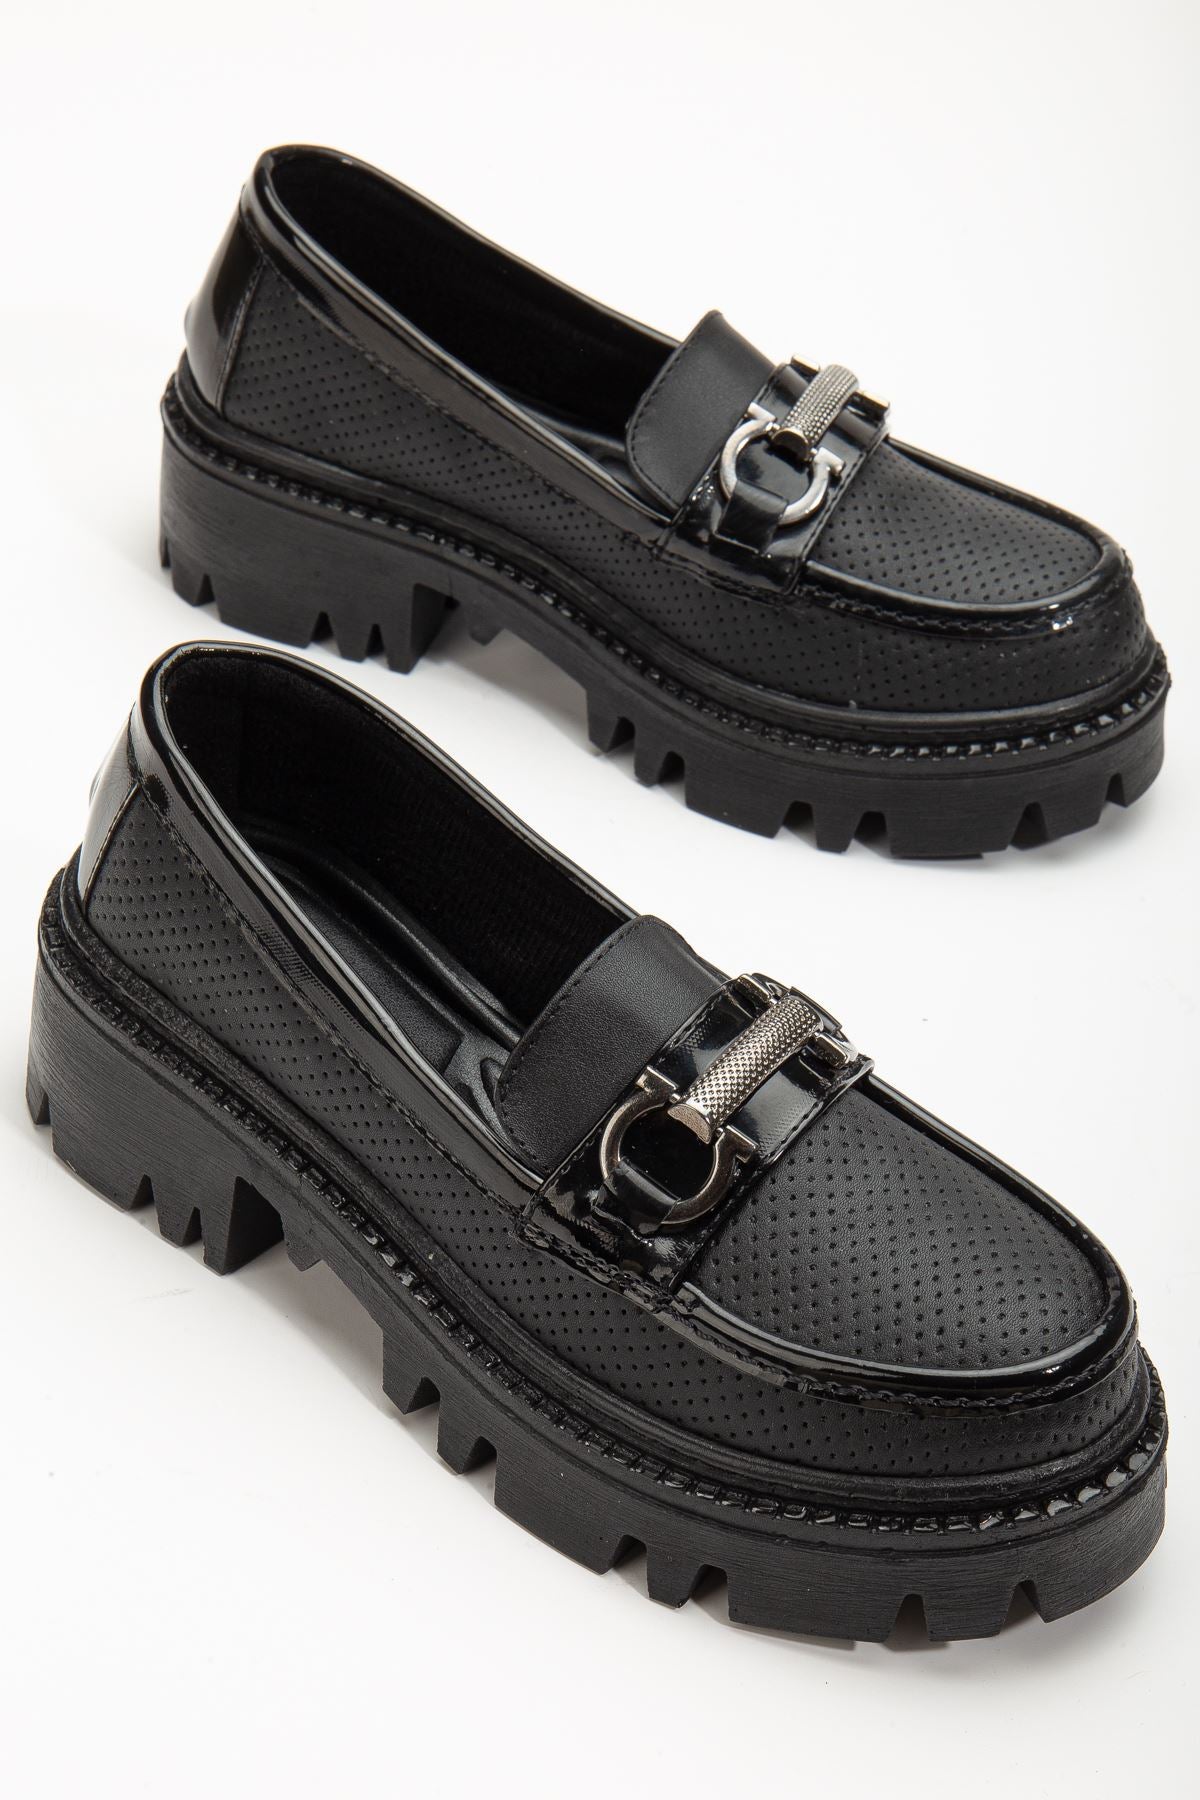 Women's Black Buckle Detailed Oxford Shoes - STREETMODE ™